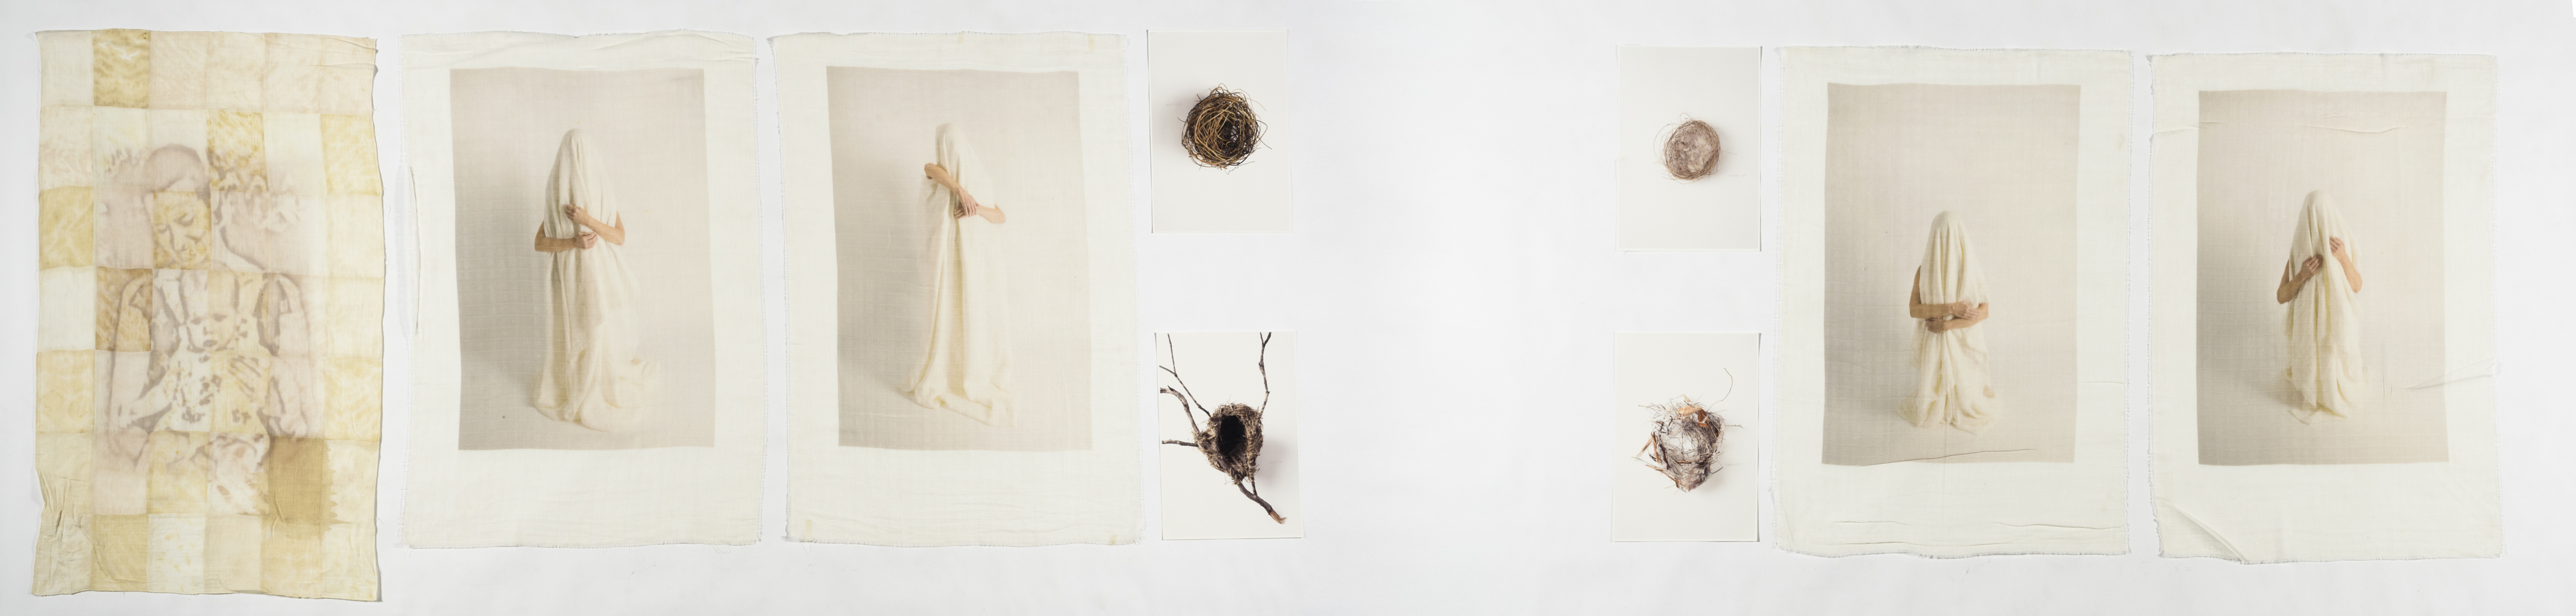 A quilt, four photographs of a figure draped in a white sheet and four photographs of birds nests on a white background.